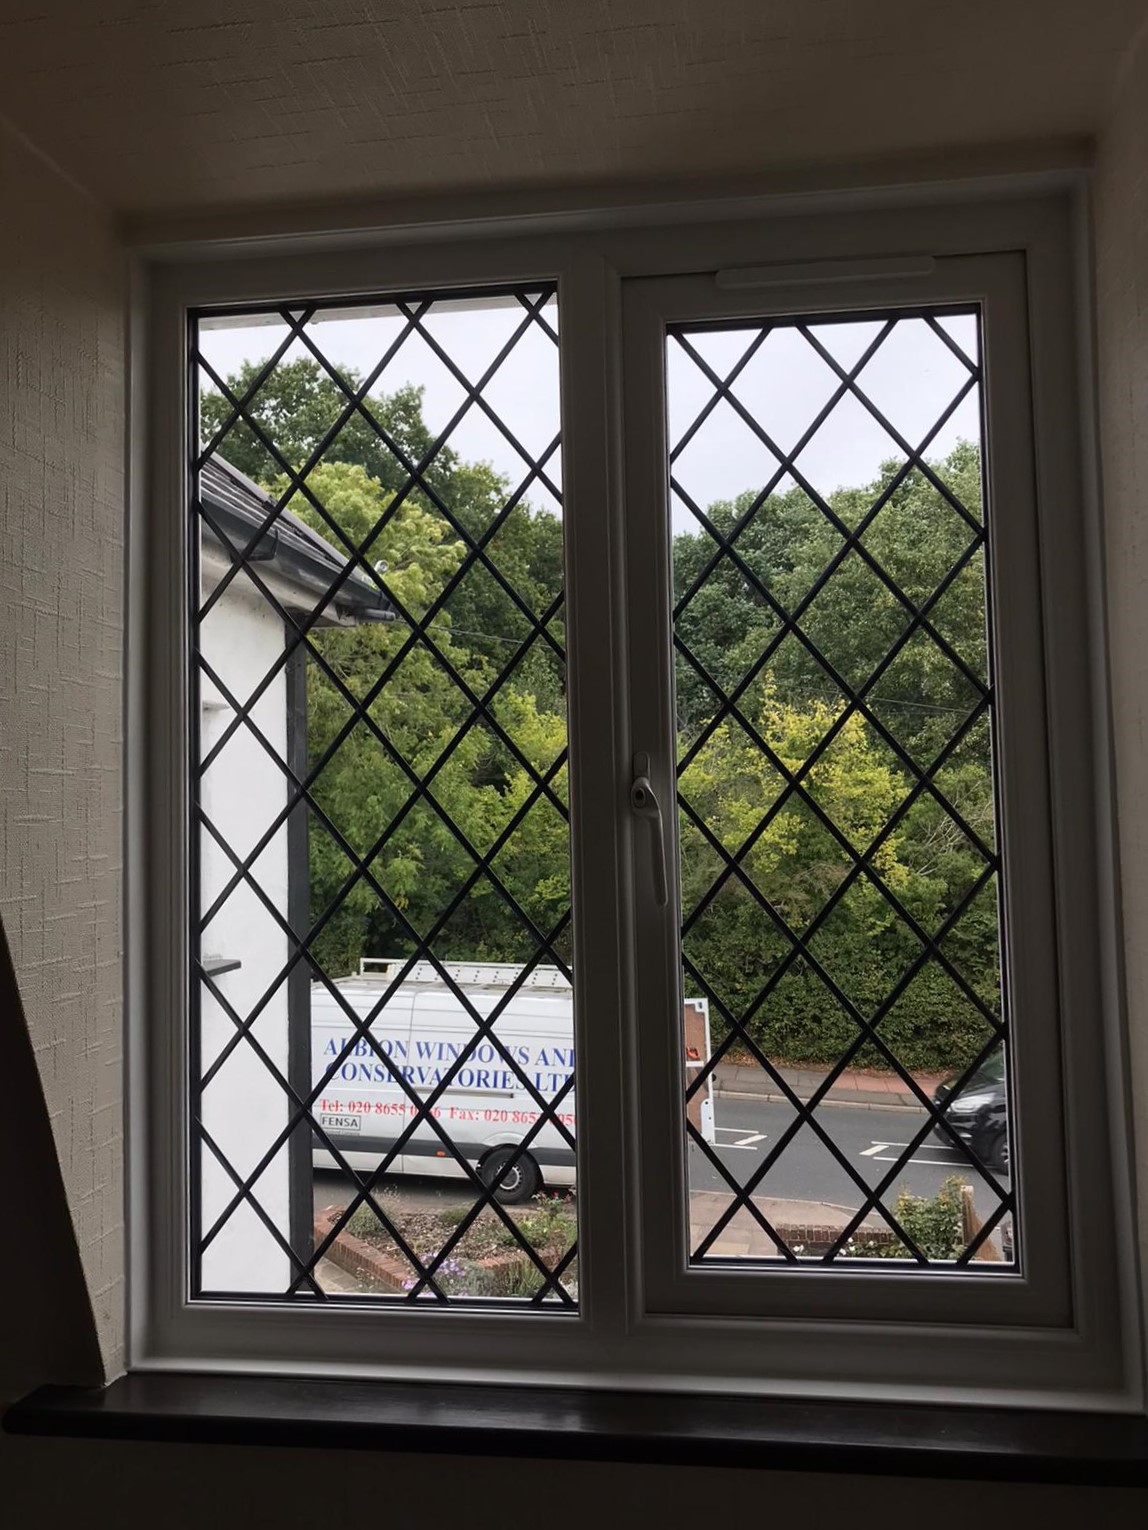 White Upvc Bay And Window With Black Cills And Trim In Bromley